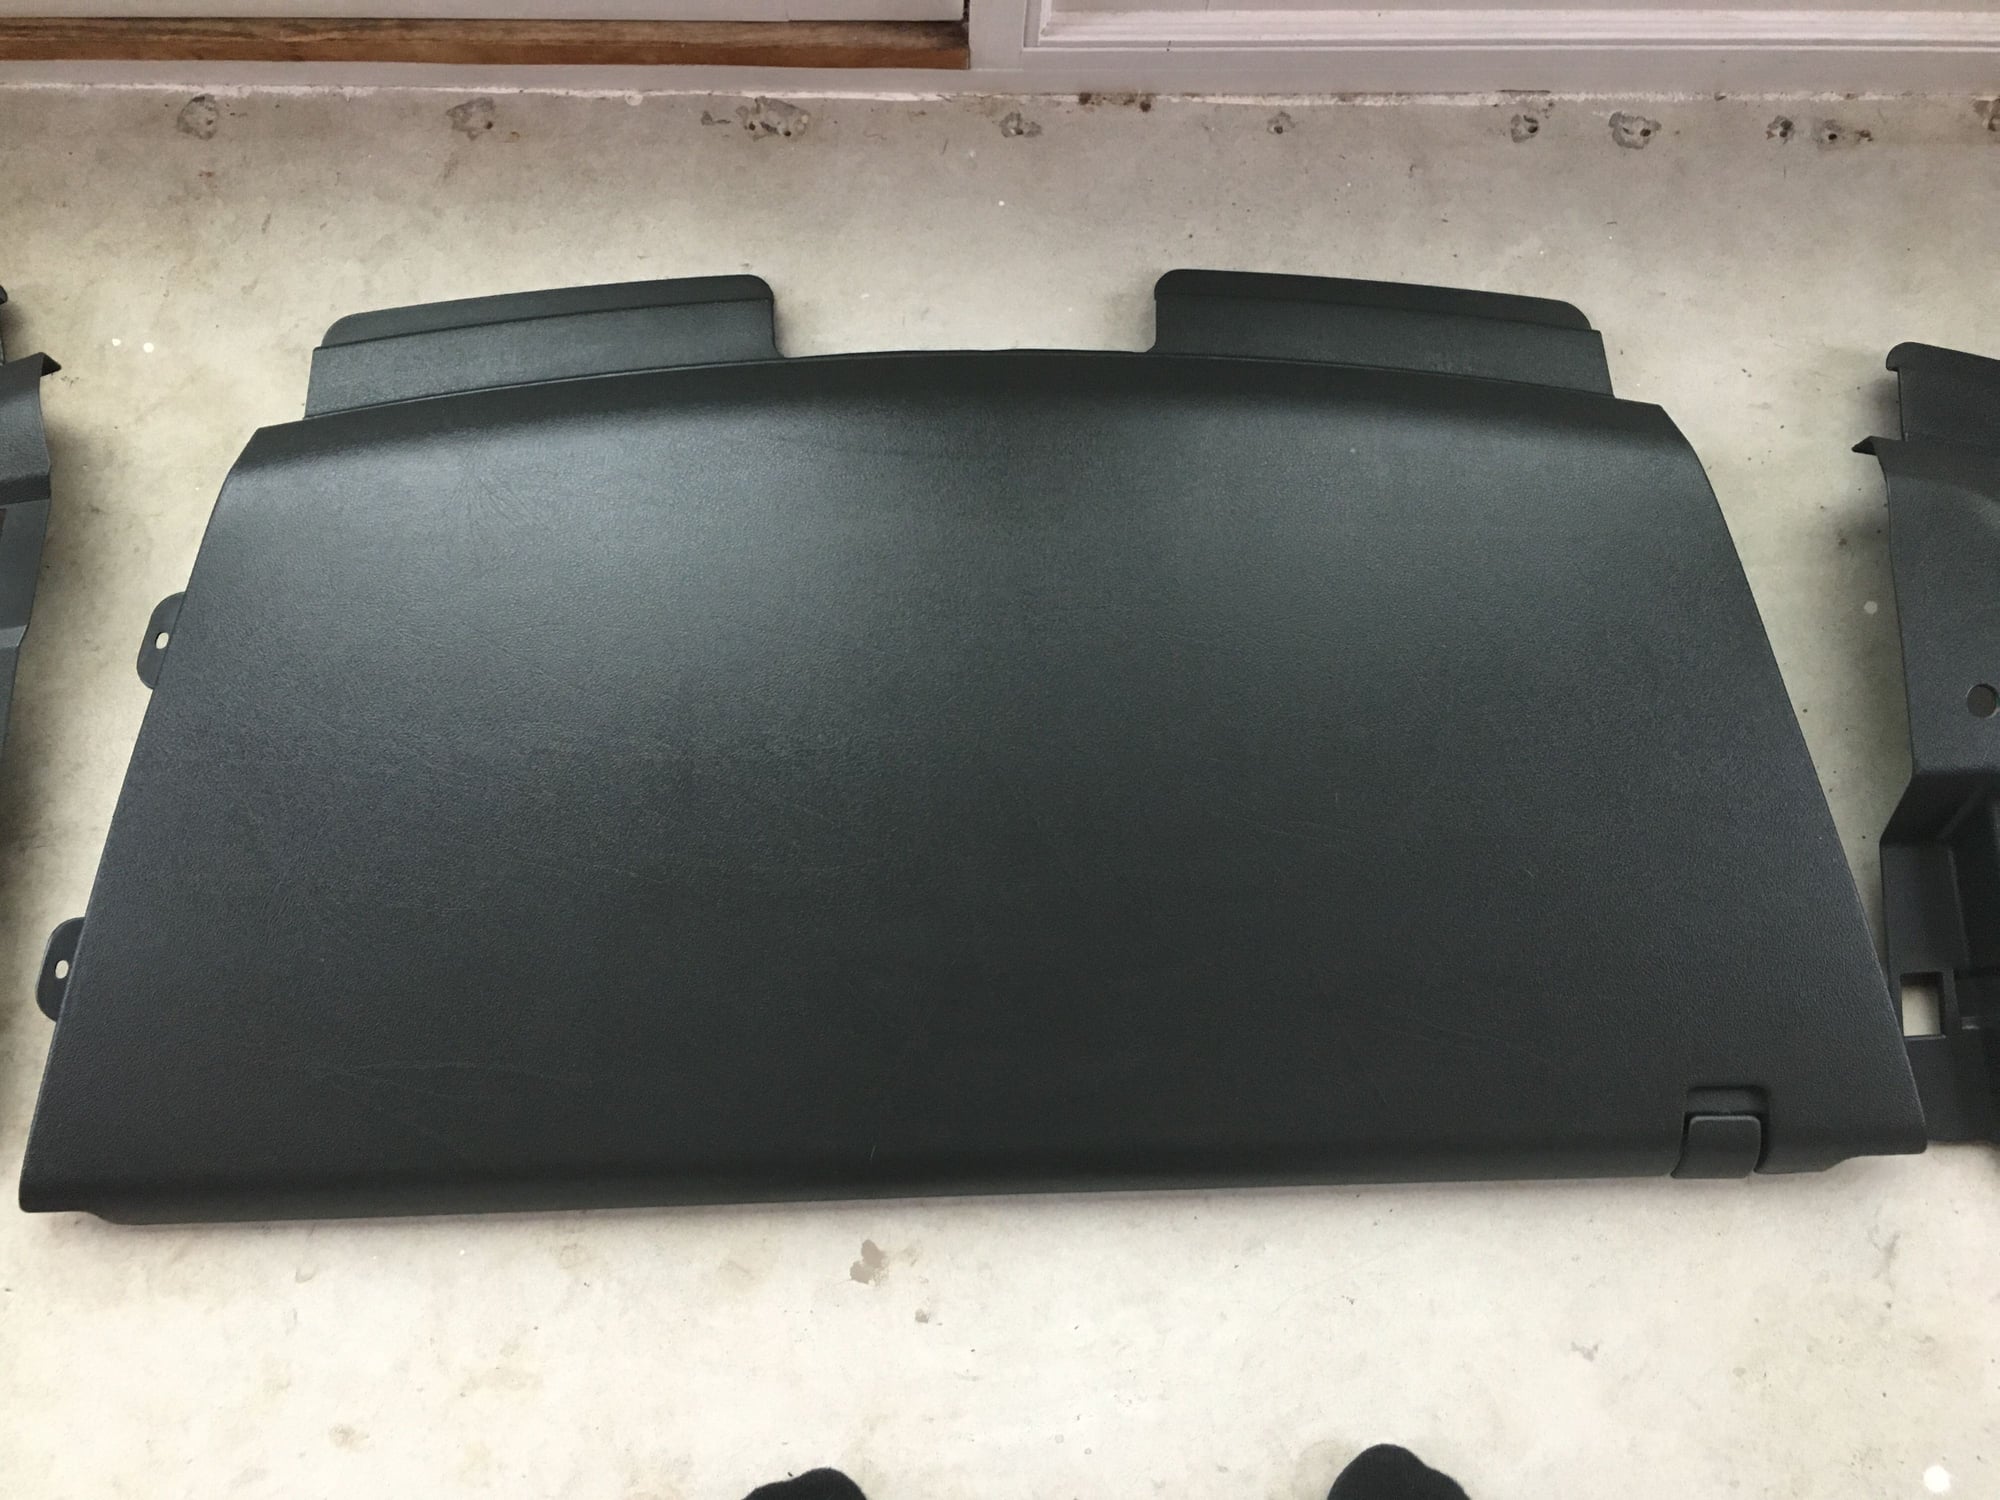  - Trans Am Convertible Boot Cover - Etters, PA 17319, United States